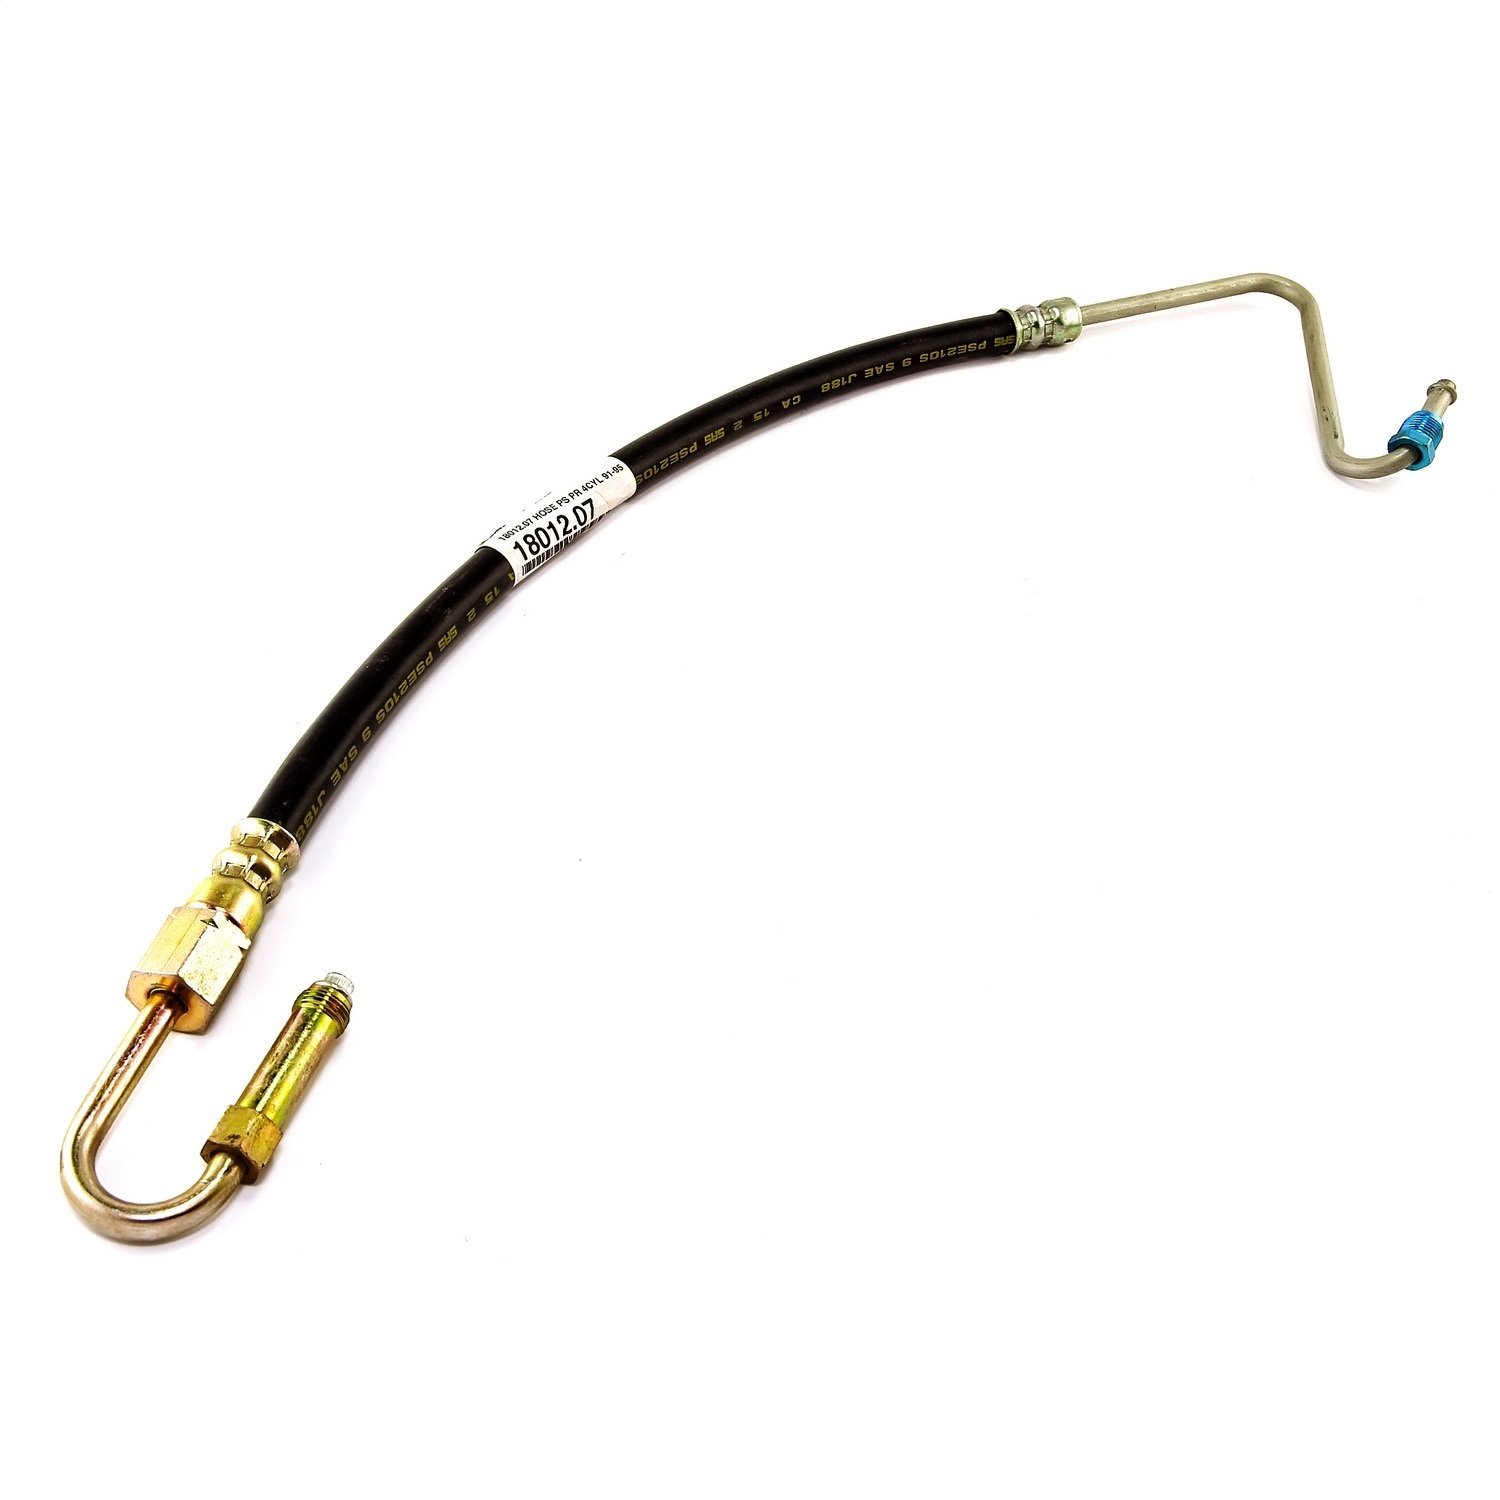 Replacement power steering pressure hose from Omix-ADA, Fits 91-95 Jeep Wrangler with 2.5 liter 4-cylinder engine.